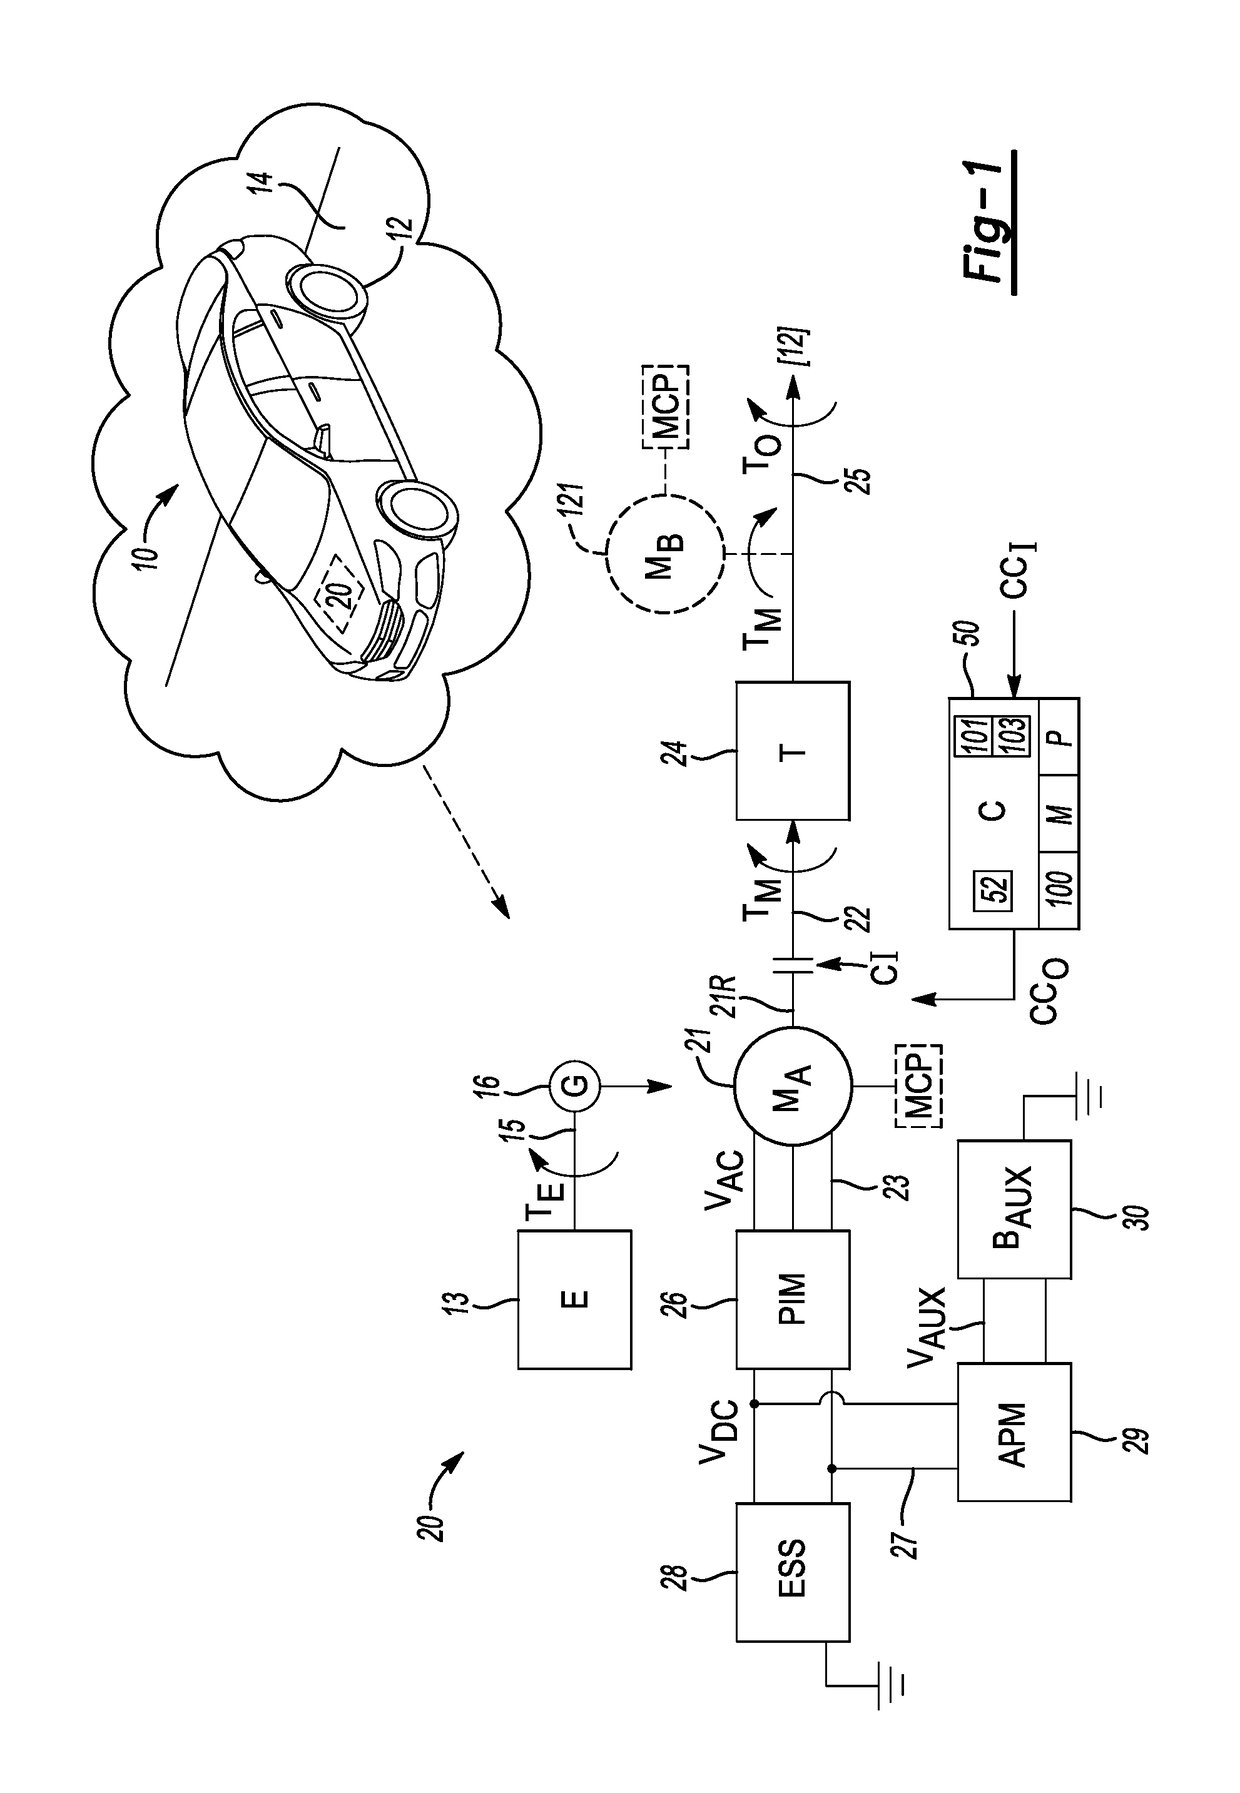 Driveline system with nested loop damping control